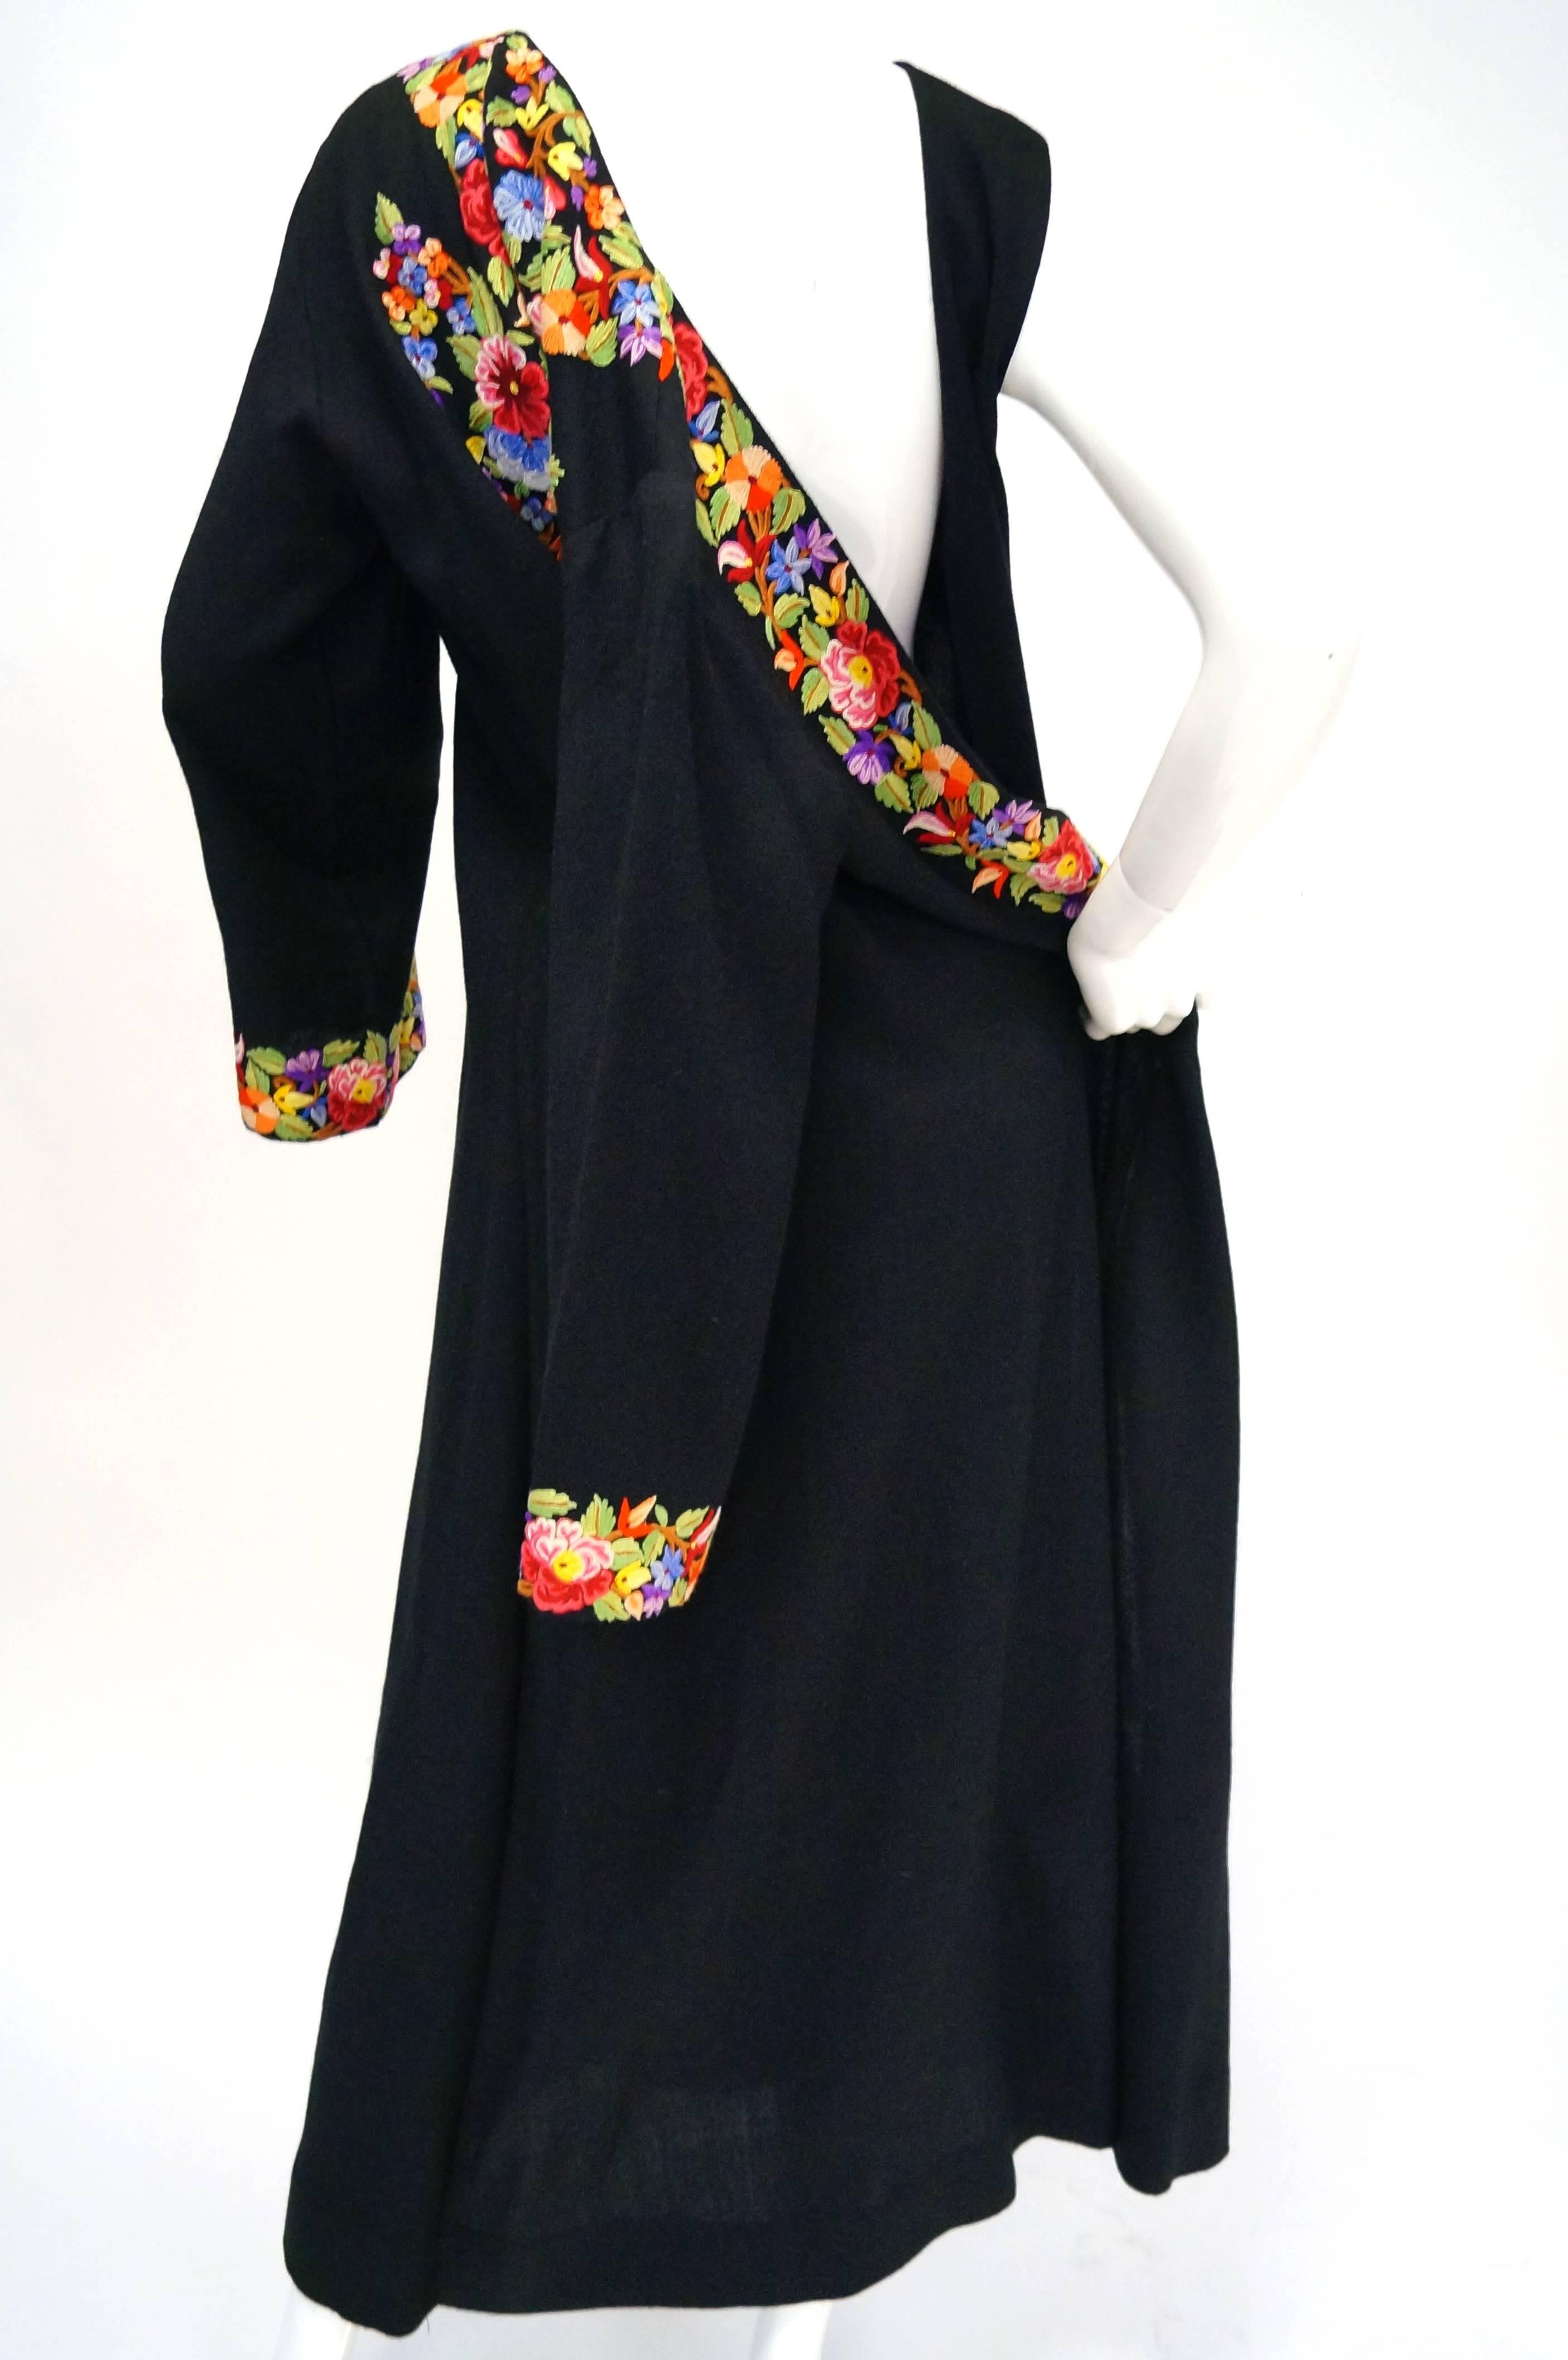 Vintage Suffering Moses Wool Kashmiri Embroidered One Piece Wrap Dress Coat 10 In Excellent Condition For Sale In Houston, TX